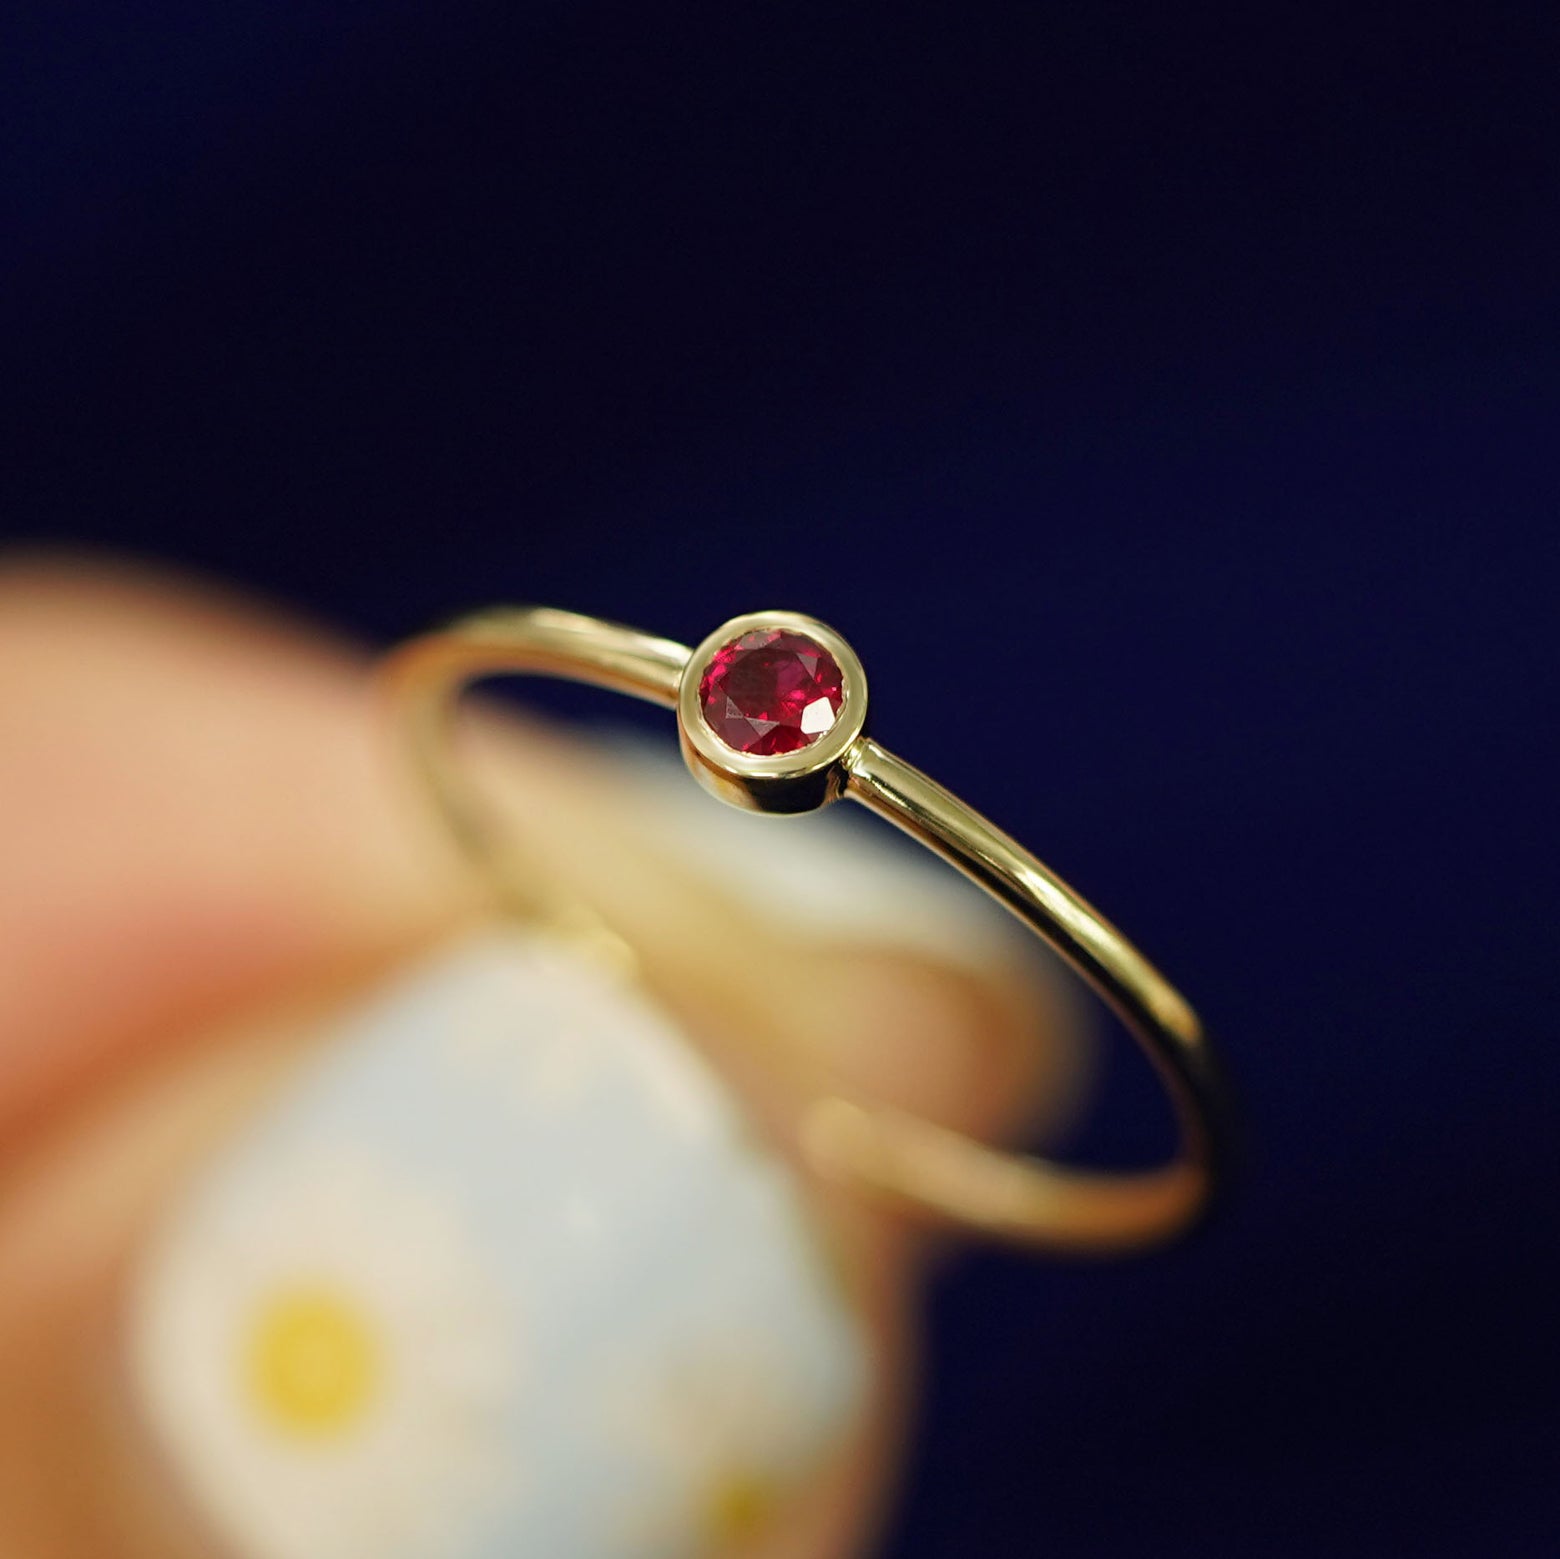 A model holding a Garnet Ring tilted to show the bezel setting